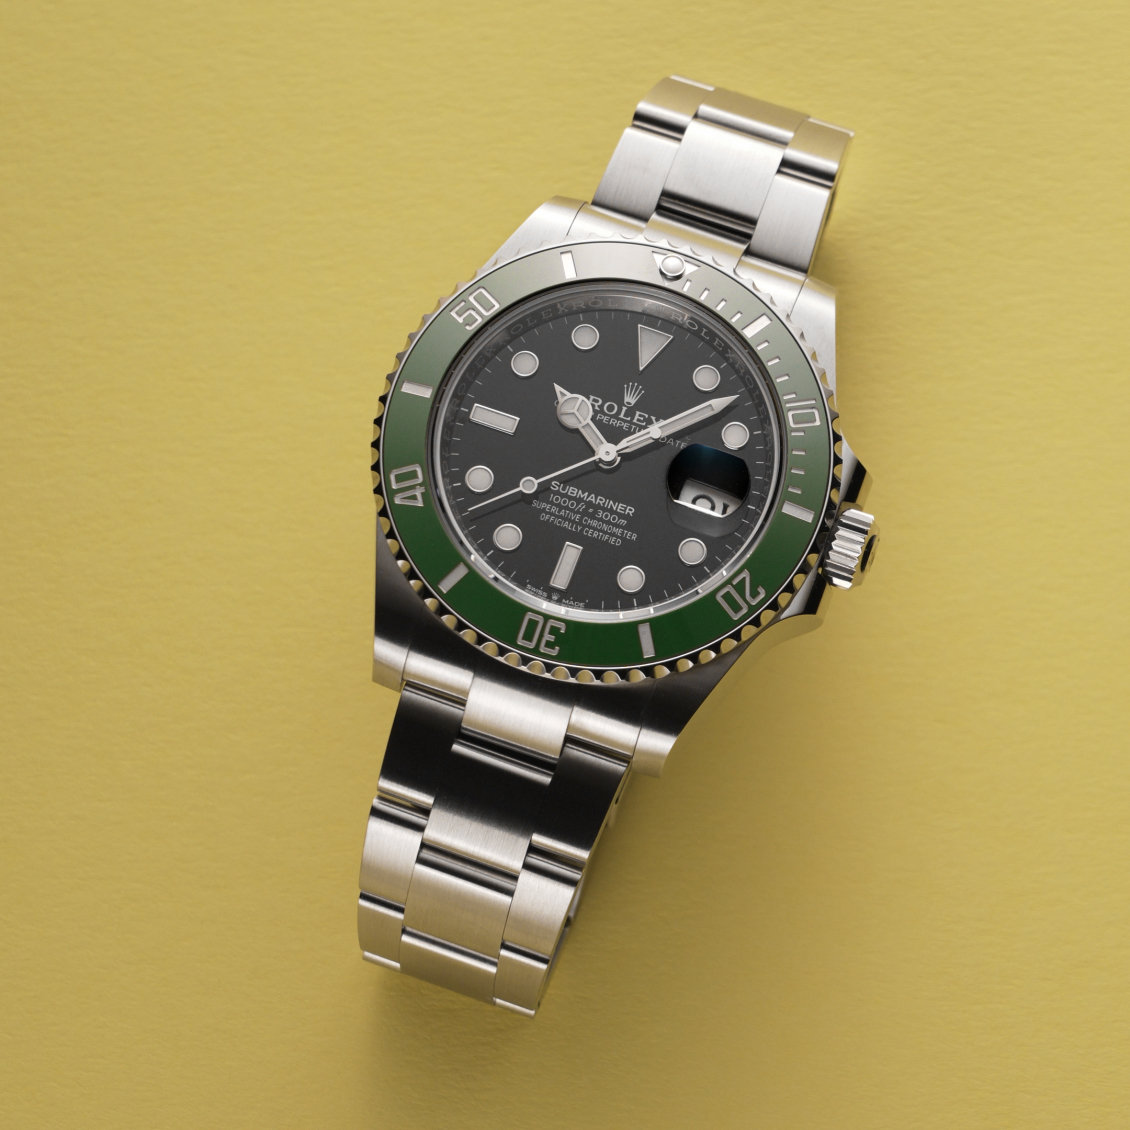 The Green Evolution: A Look at Rolex’s Iconic Submariners